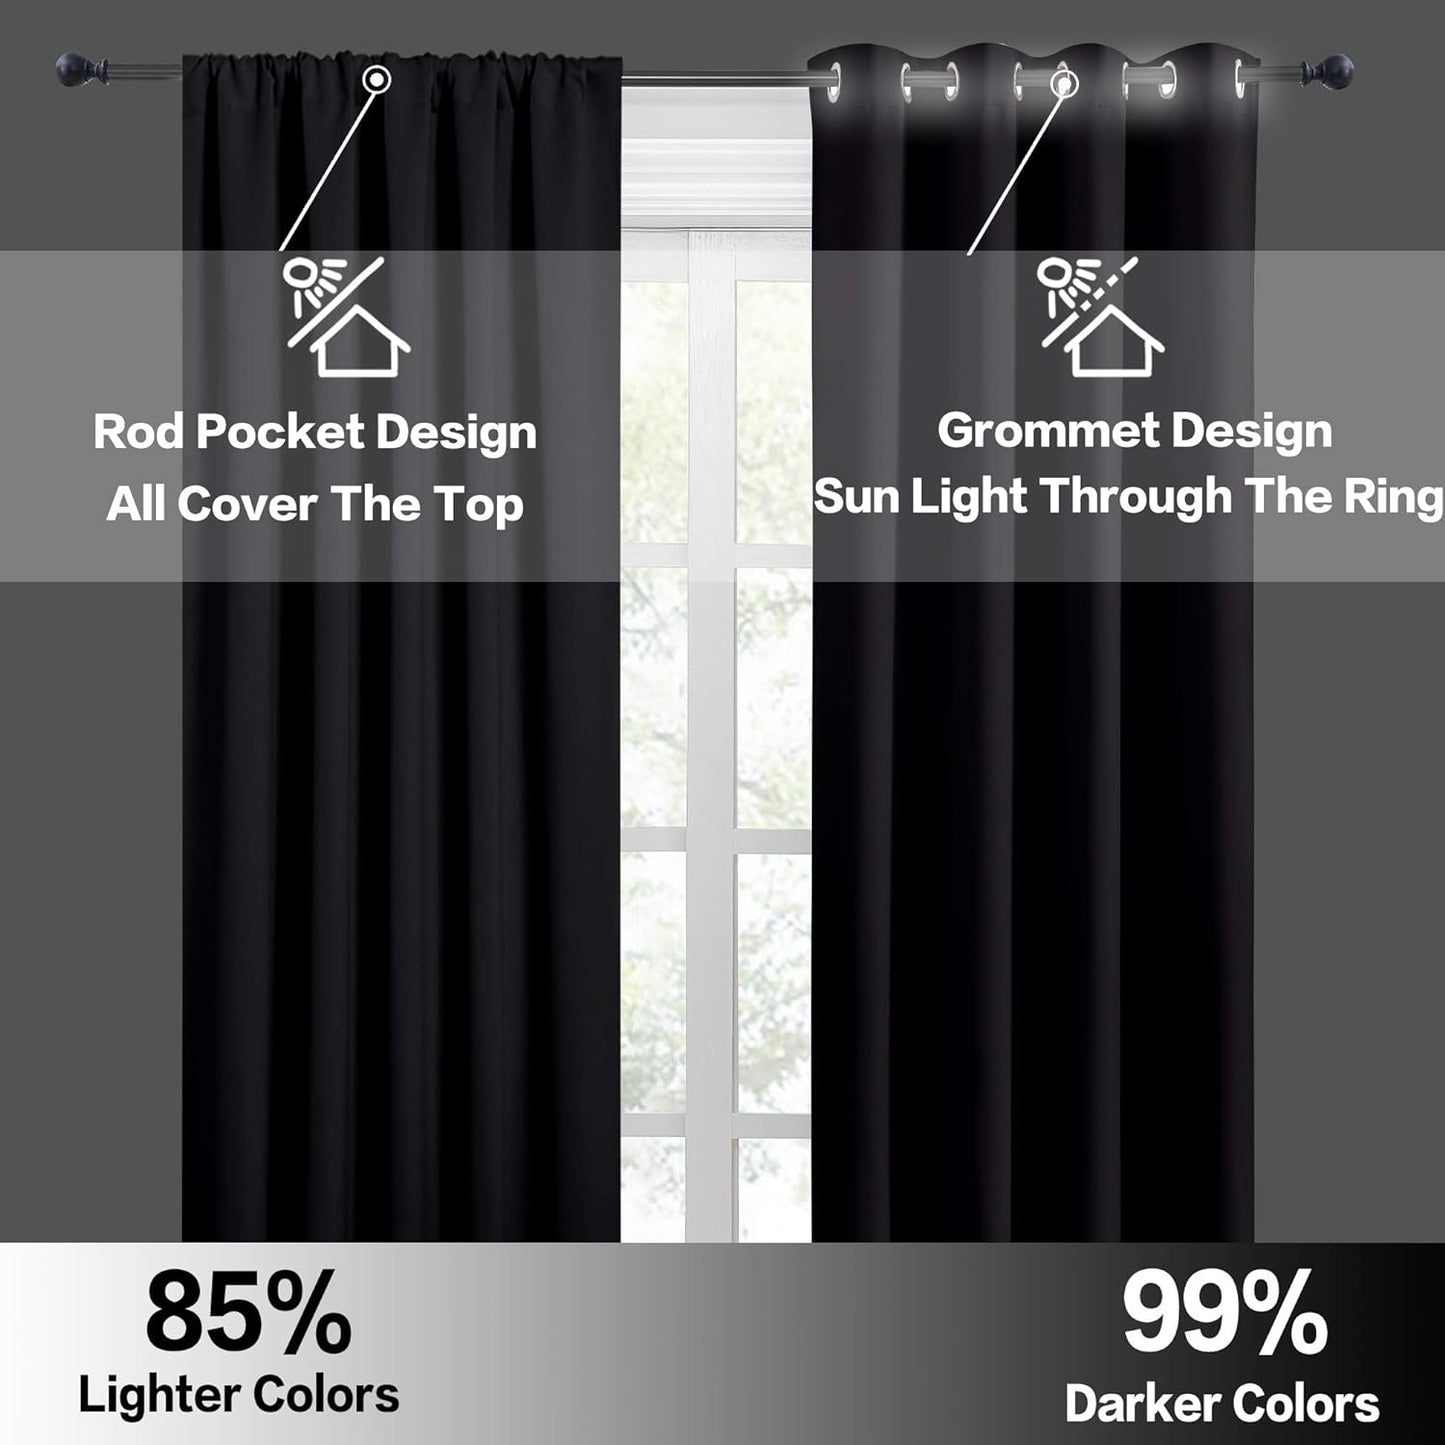 RYB HOME Black Curtains for Windows, Bathroom Curtains Small Window Drapery Blackout Curtains Privacy Drapes for Cafe Bedroom Curtains, Width 29 by Length 24, 1 Pair  RYB HOME   